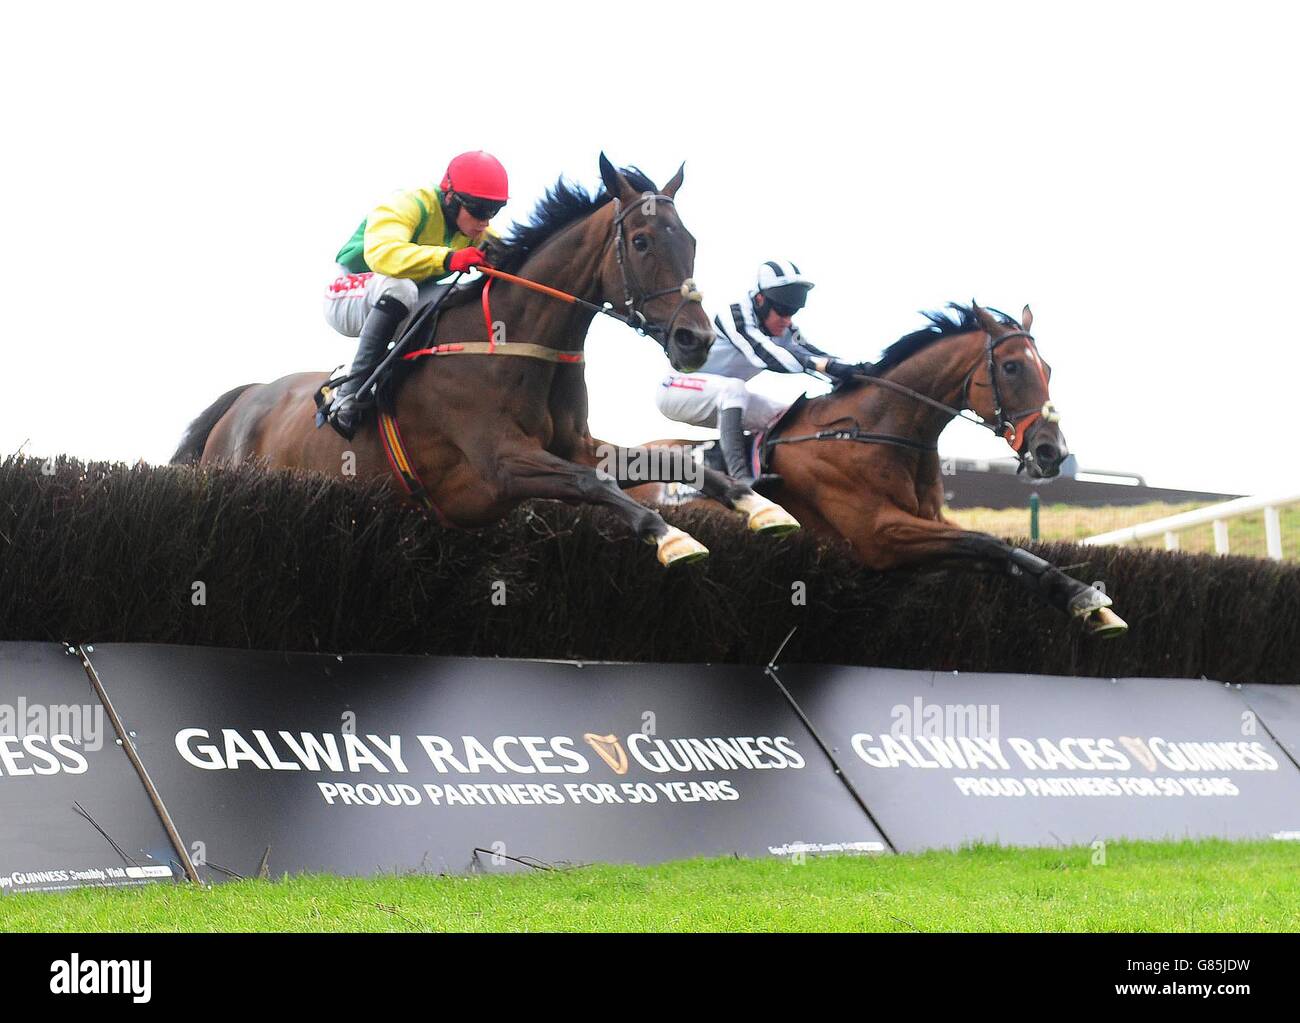 Galway 30-7-15 SIZING PLATINUM & Jonathan Burke (left) jump the last to win the Guinnes Harp Novice Steeplechase from ROCK THE WORLD & Barry Geraghty (right)(WWW.HEALYRACING.IE) Stock Photo